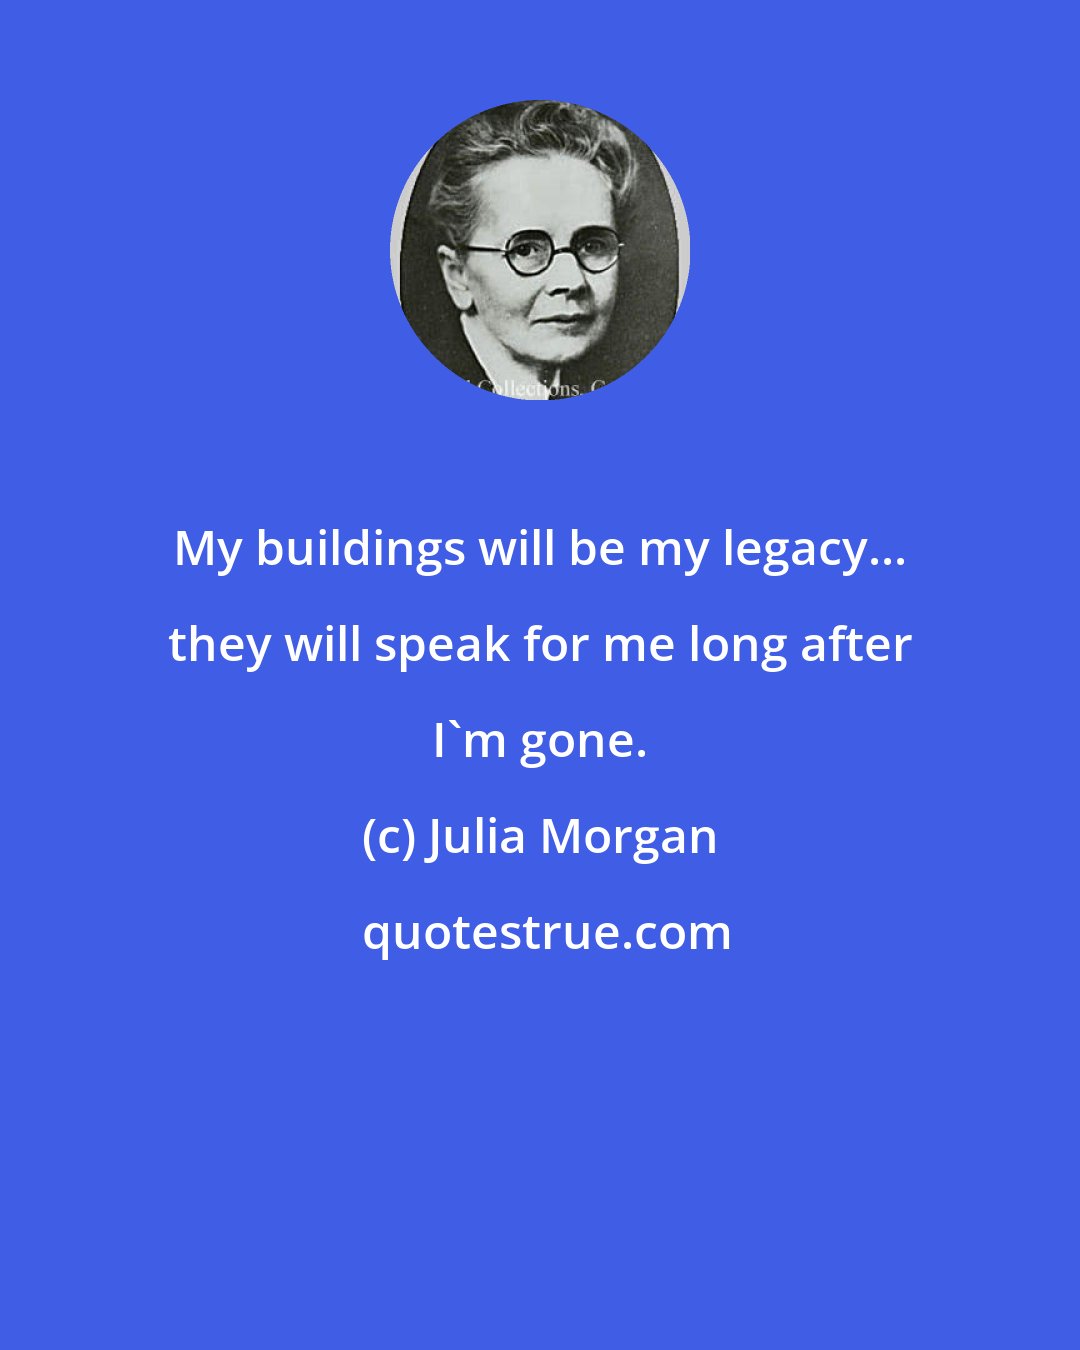 Julia Morgan: My buildings will be my legacy... they will speak for me long after I'm gone.